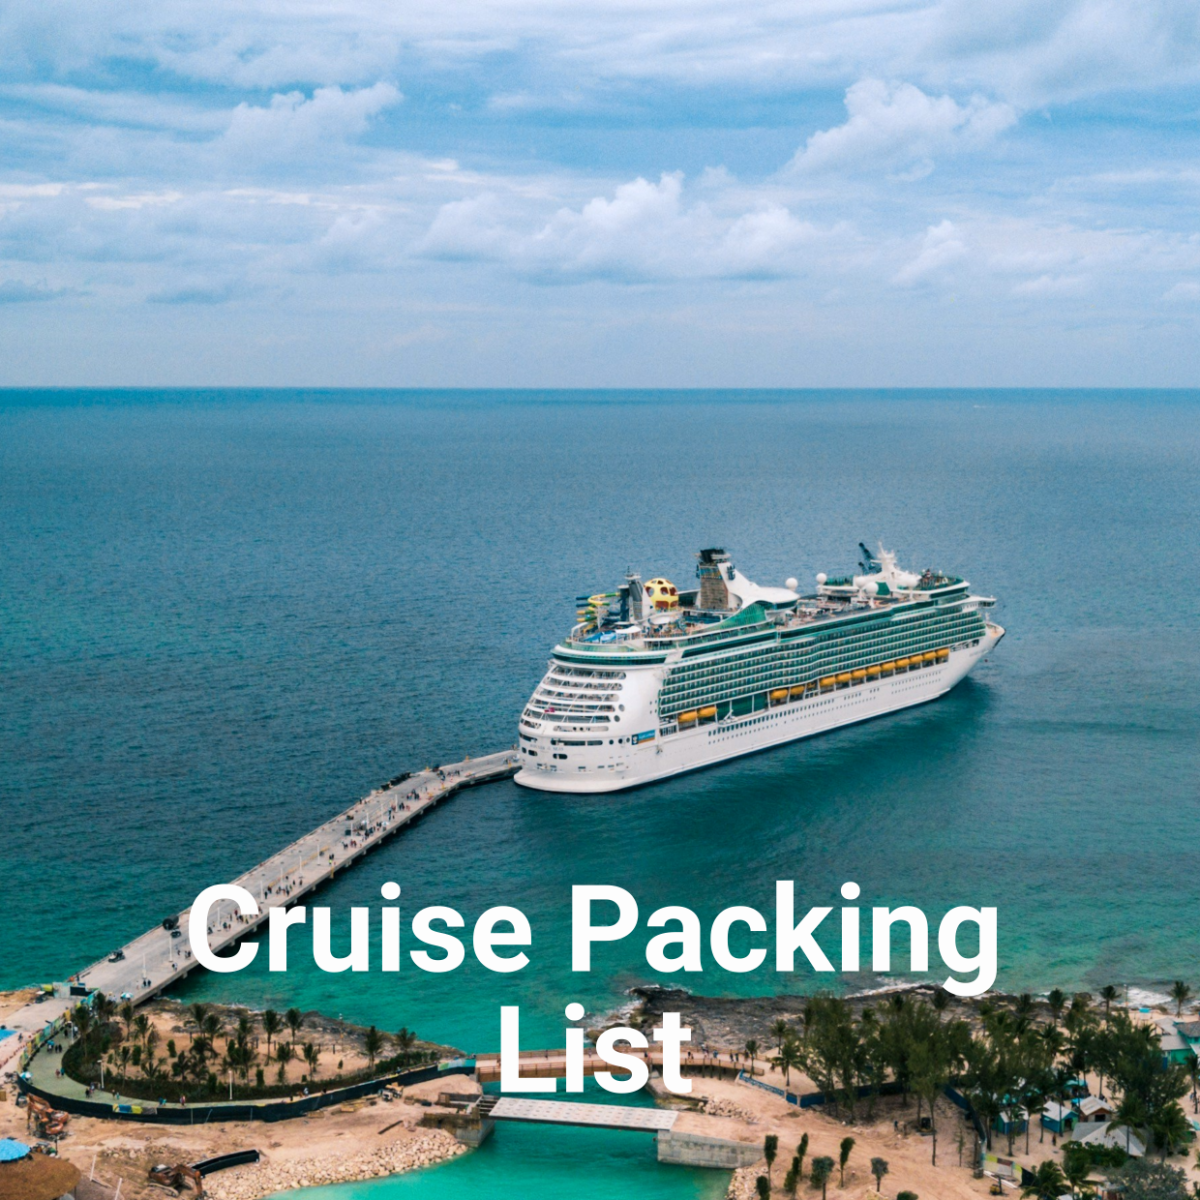 Cruise Packing List Template